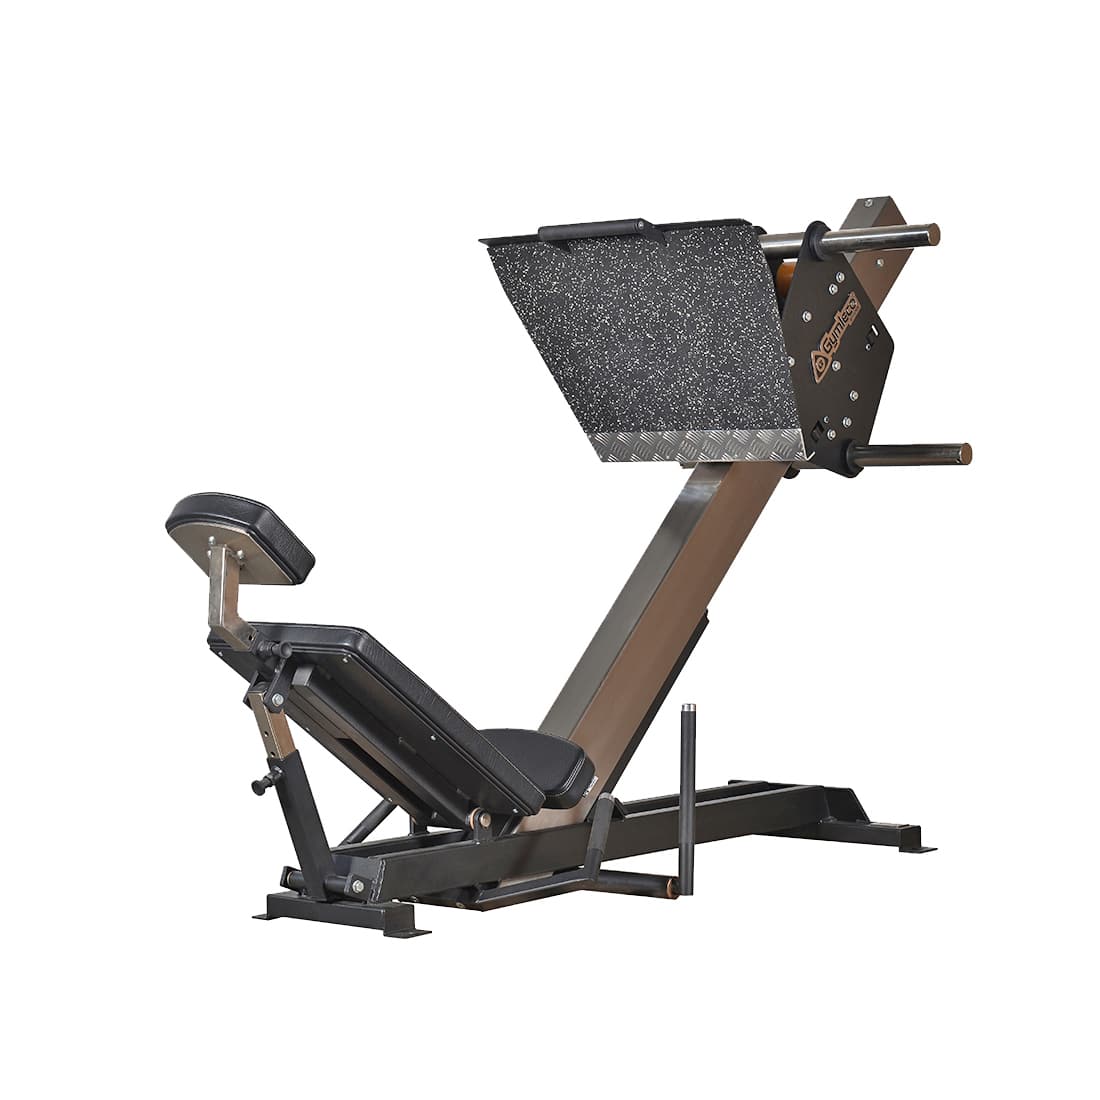 Gymleco Leg Press 45° machine product picture with white background